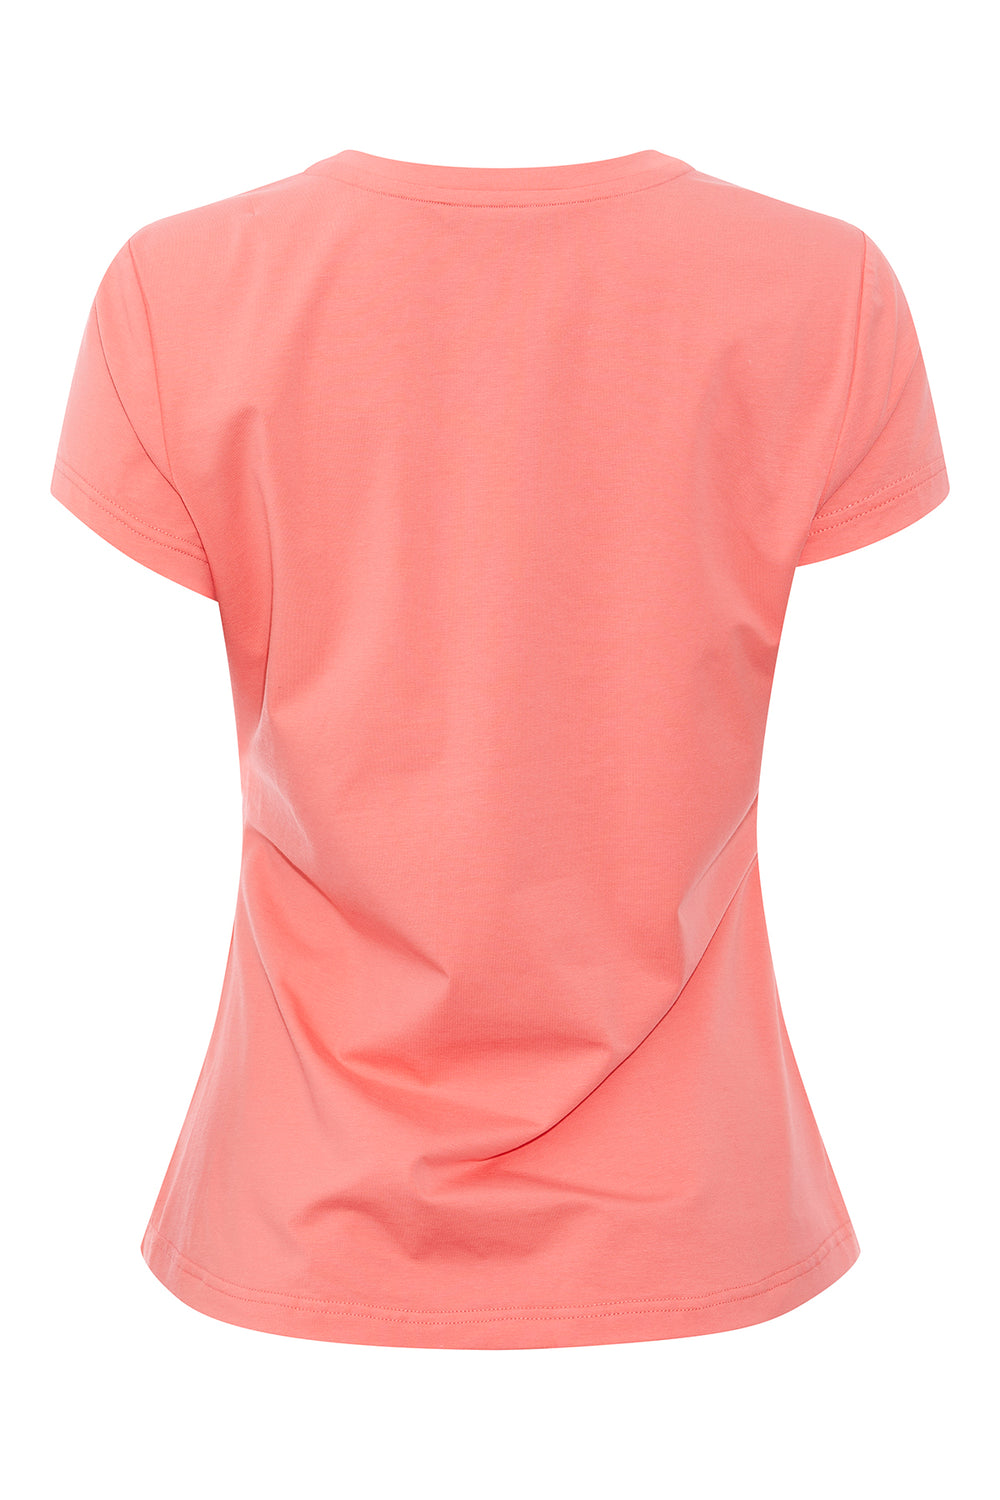 PBO Philosopher T-shirt T-SHIRTS 318 Spiced coral